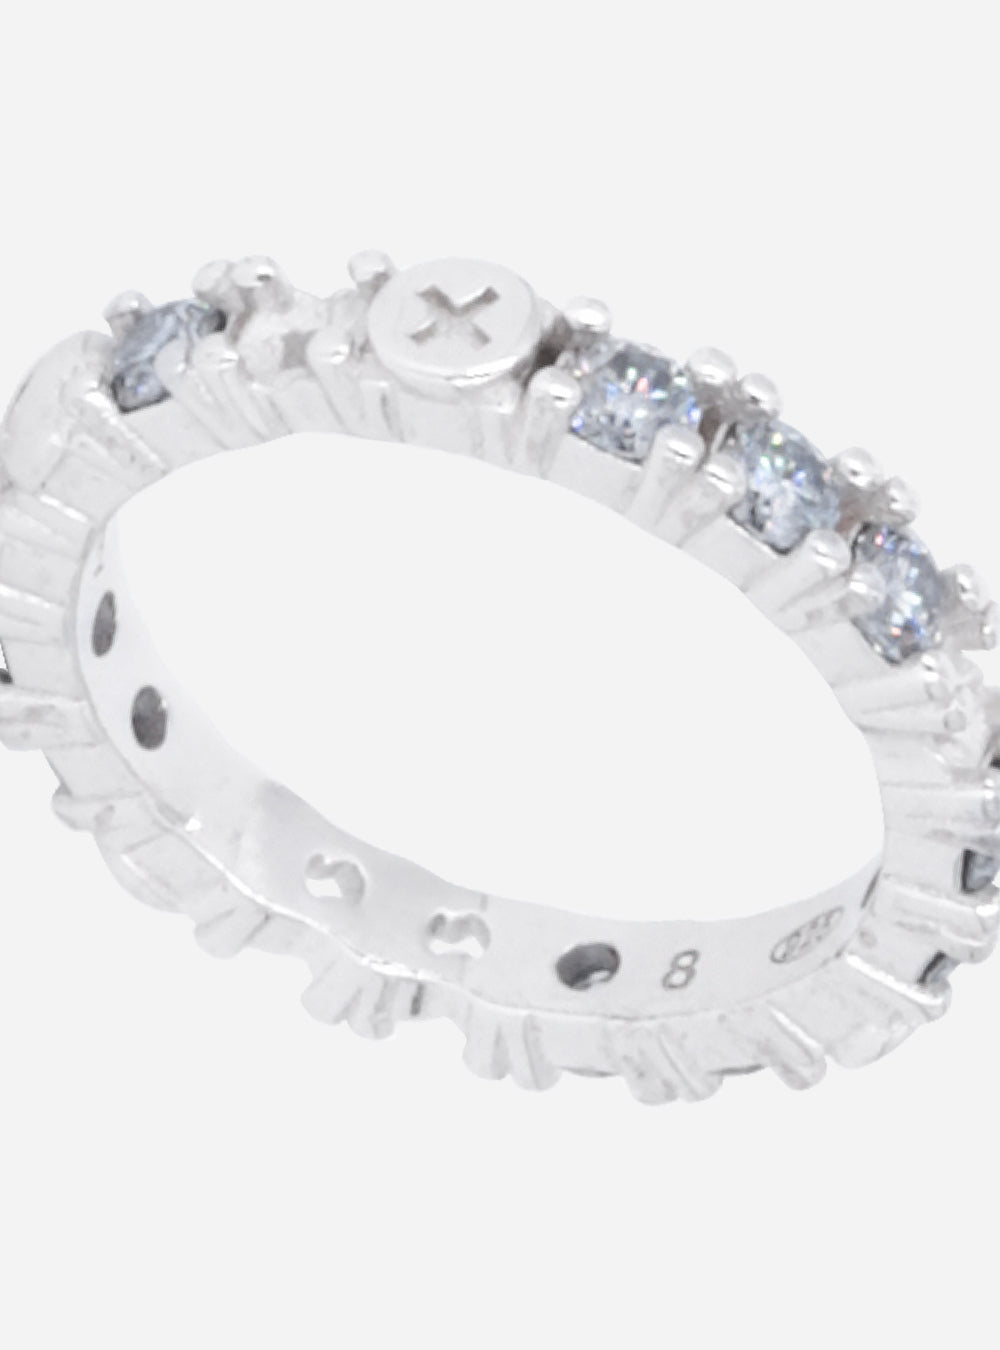 A Broken eternity ring with gray moissanite by MIDNIGHTFACTORY.